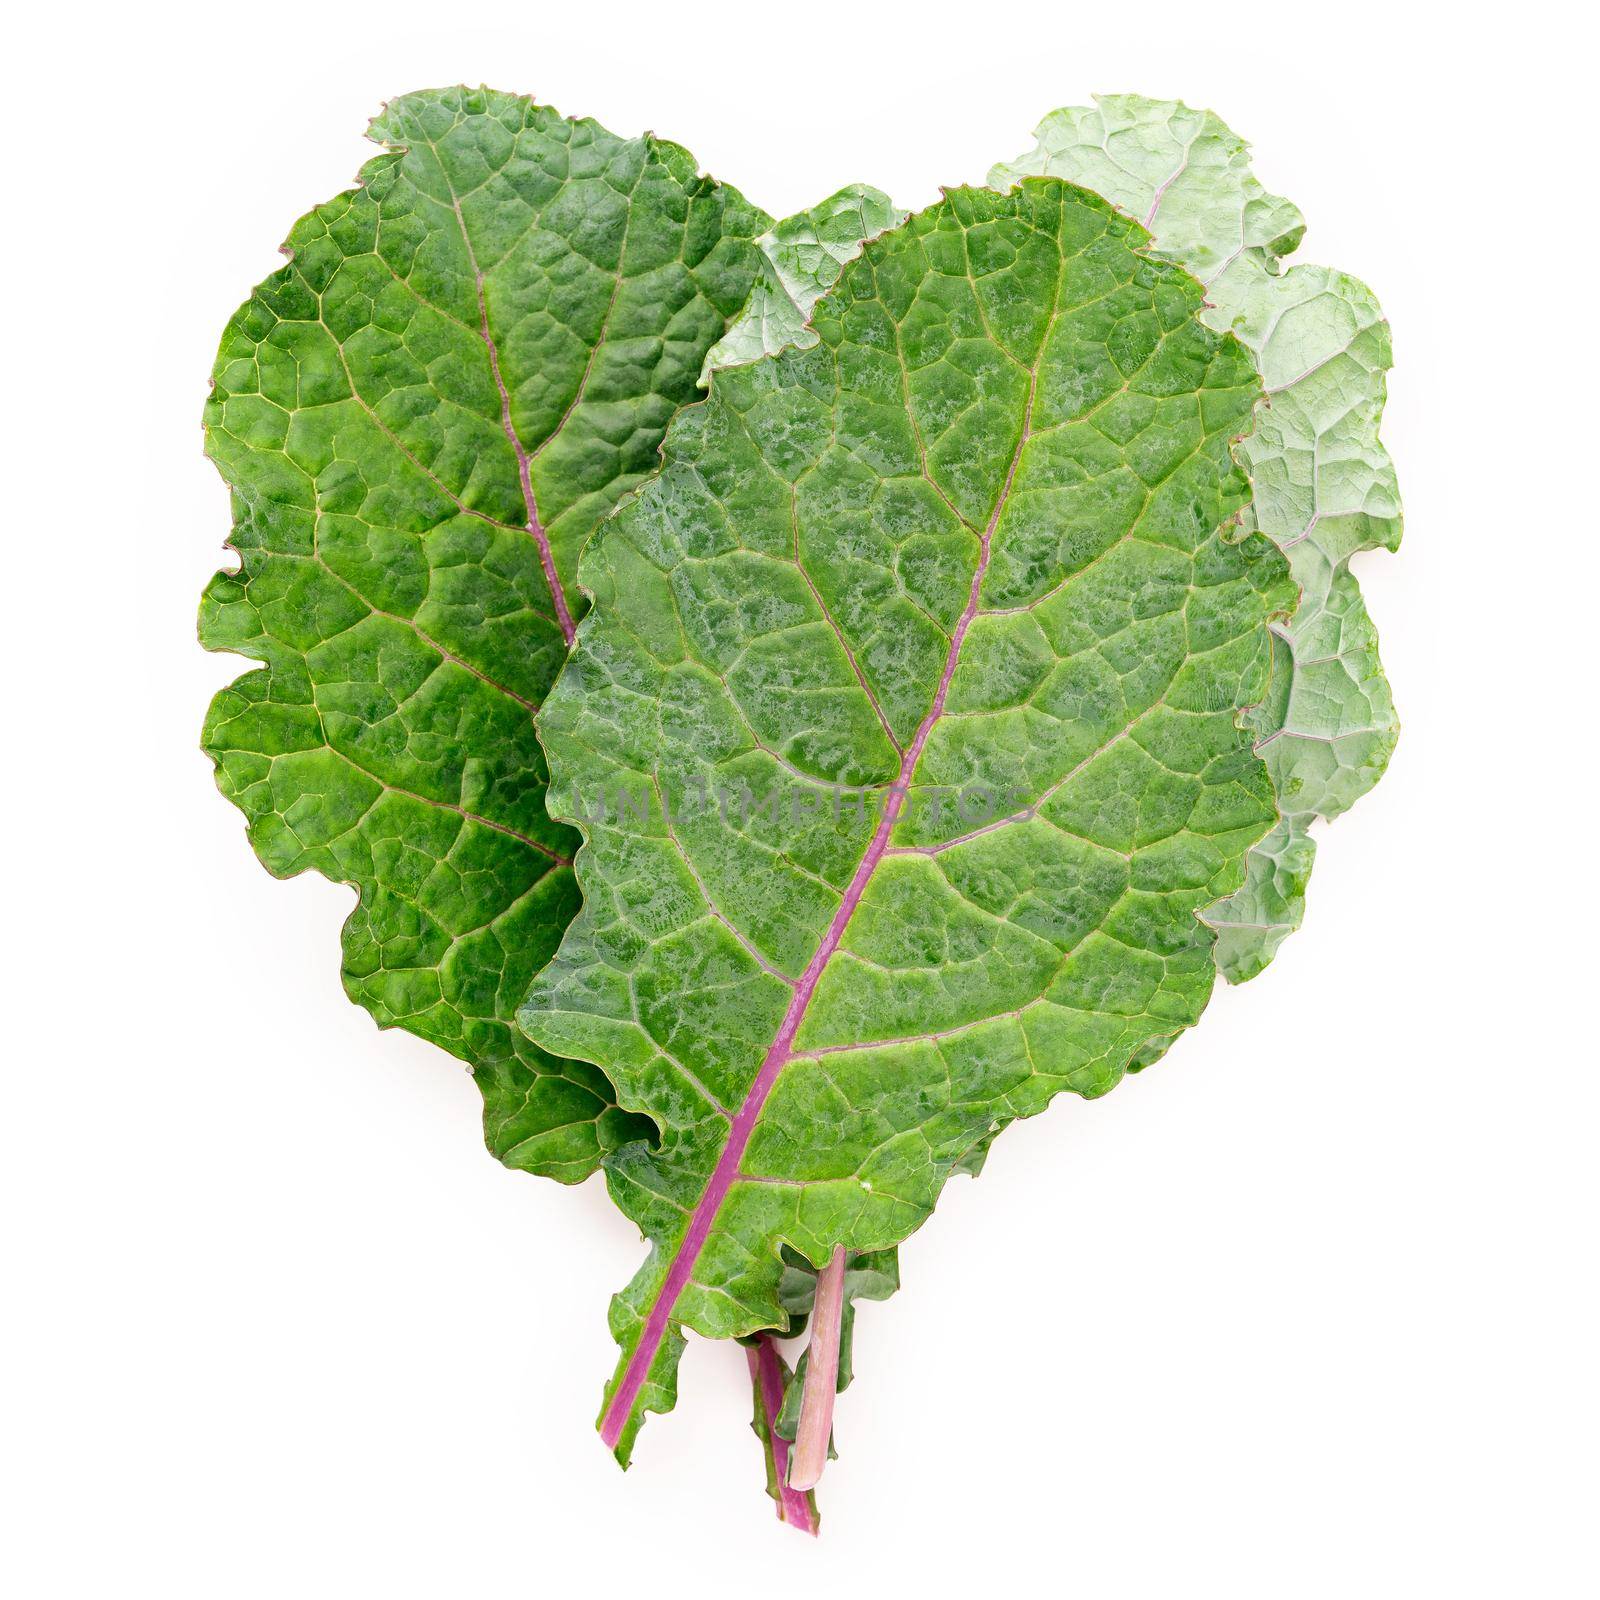 Flat lay fresh kale leaves in heart shape isolated on white background. Top view love healthy organic food.